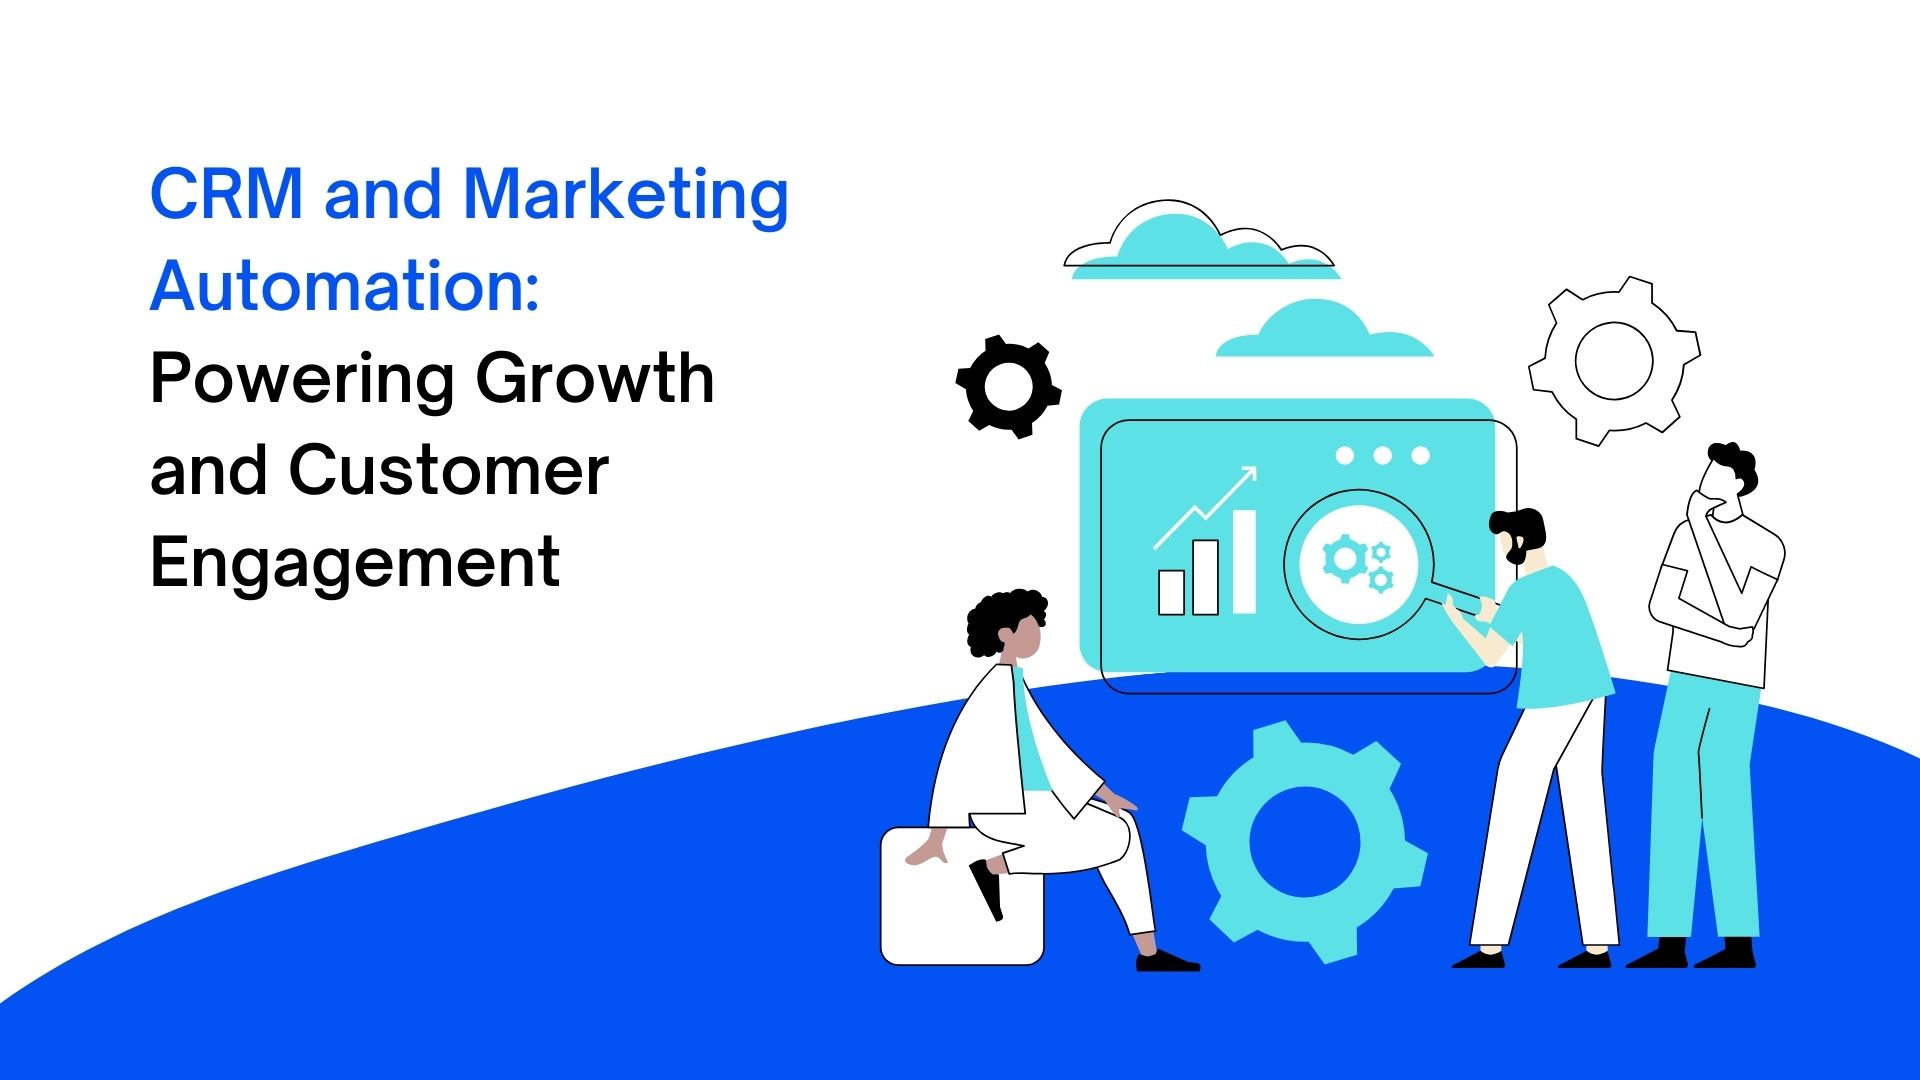 CRM and Marketing Automation: Powering Growth and Customer Engagement